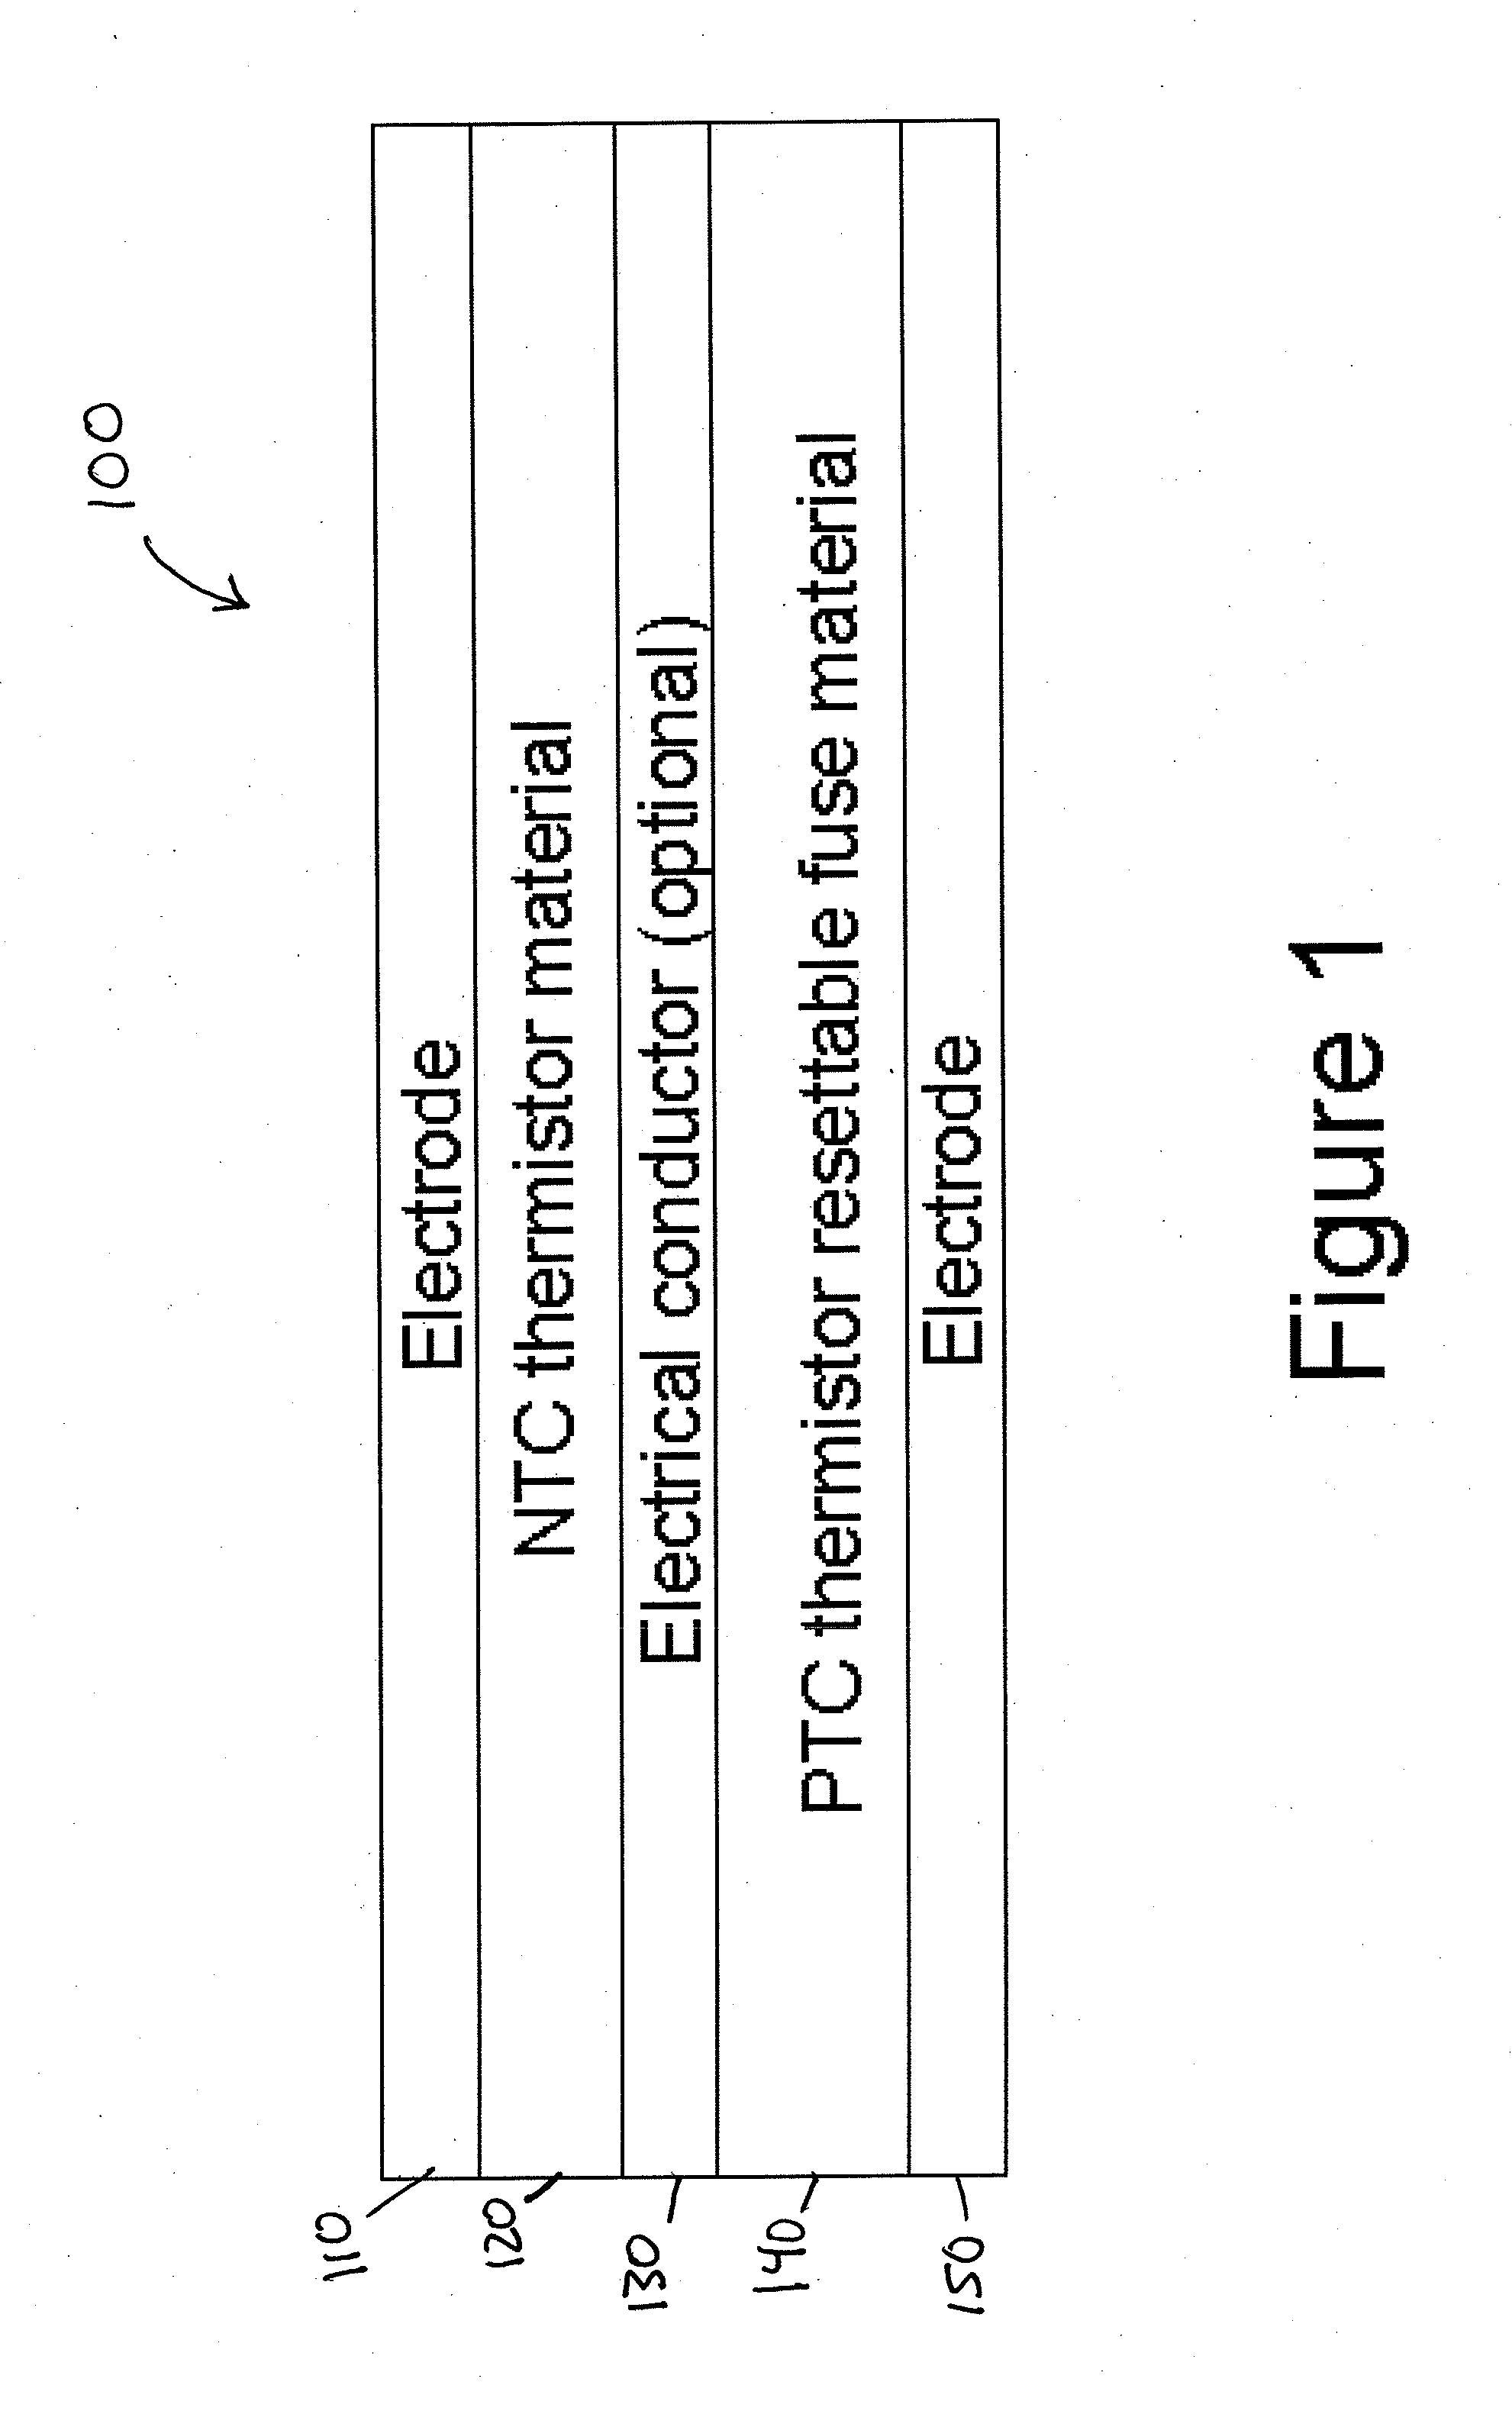 Resettable fuse with temperature compensation